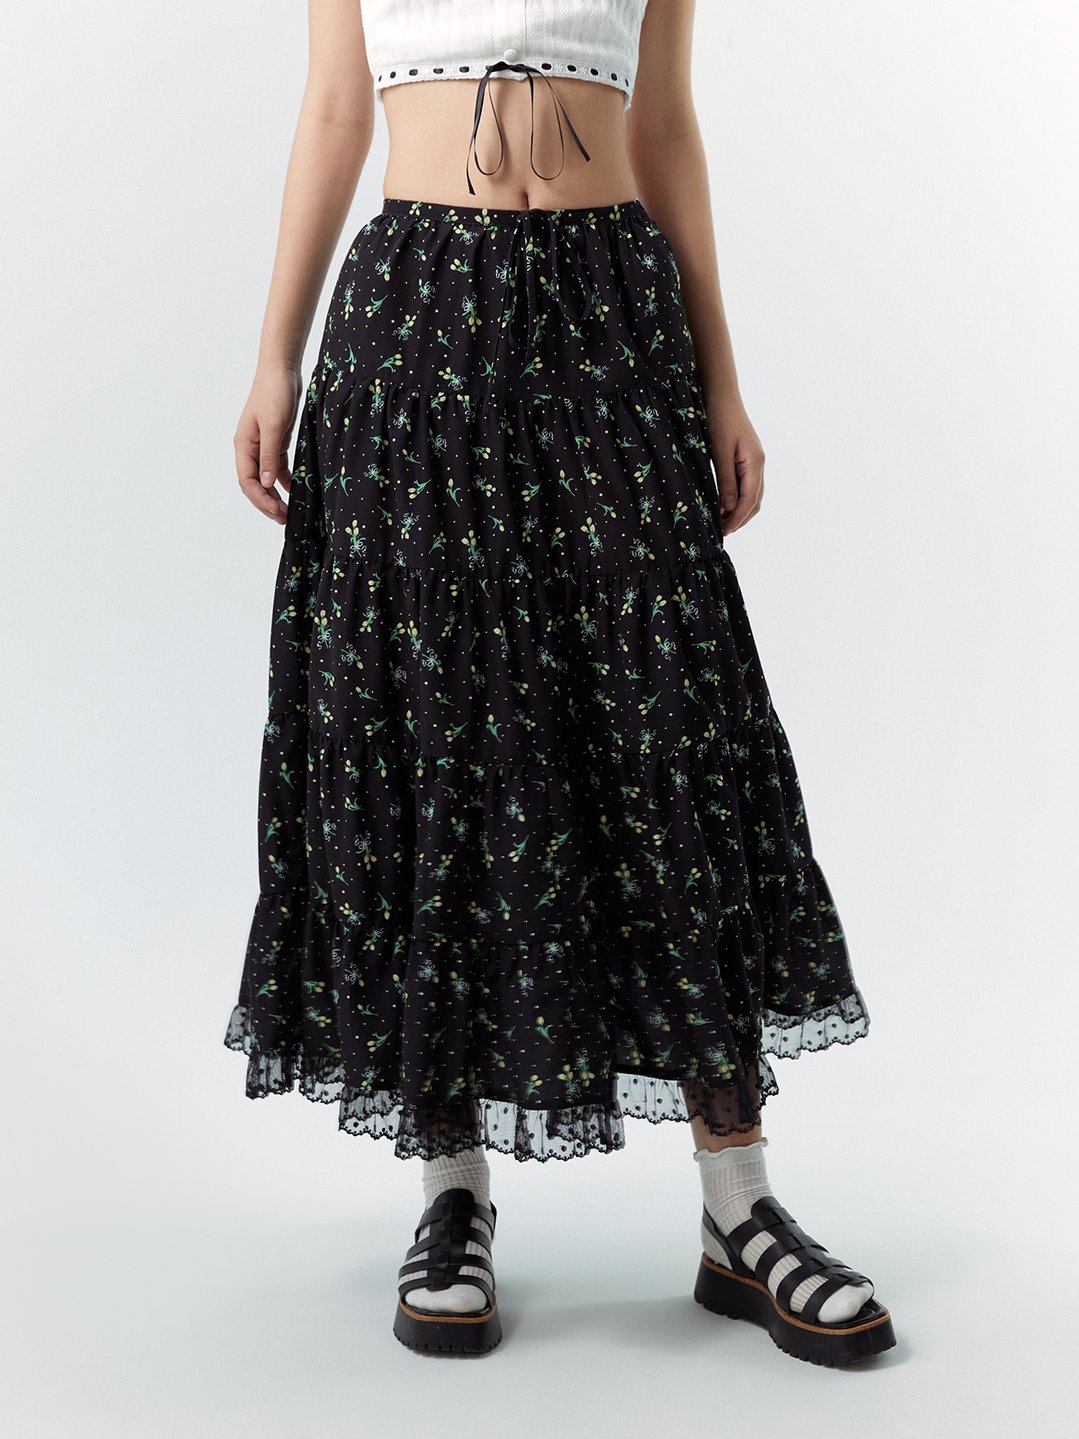 Styling the Black Flowy Long Skirt for Every Occasion